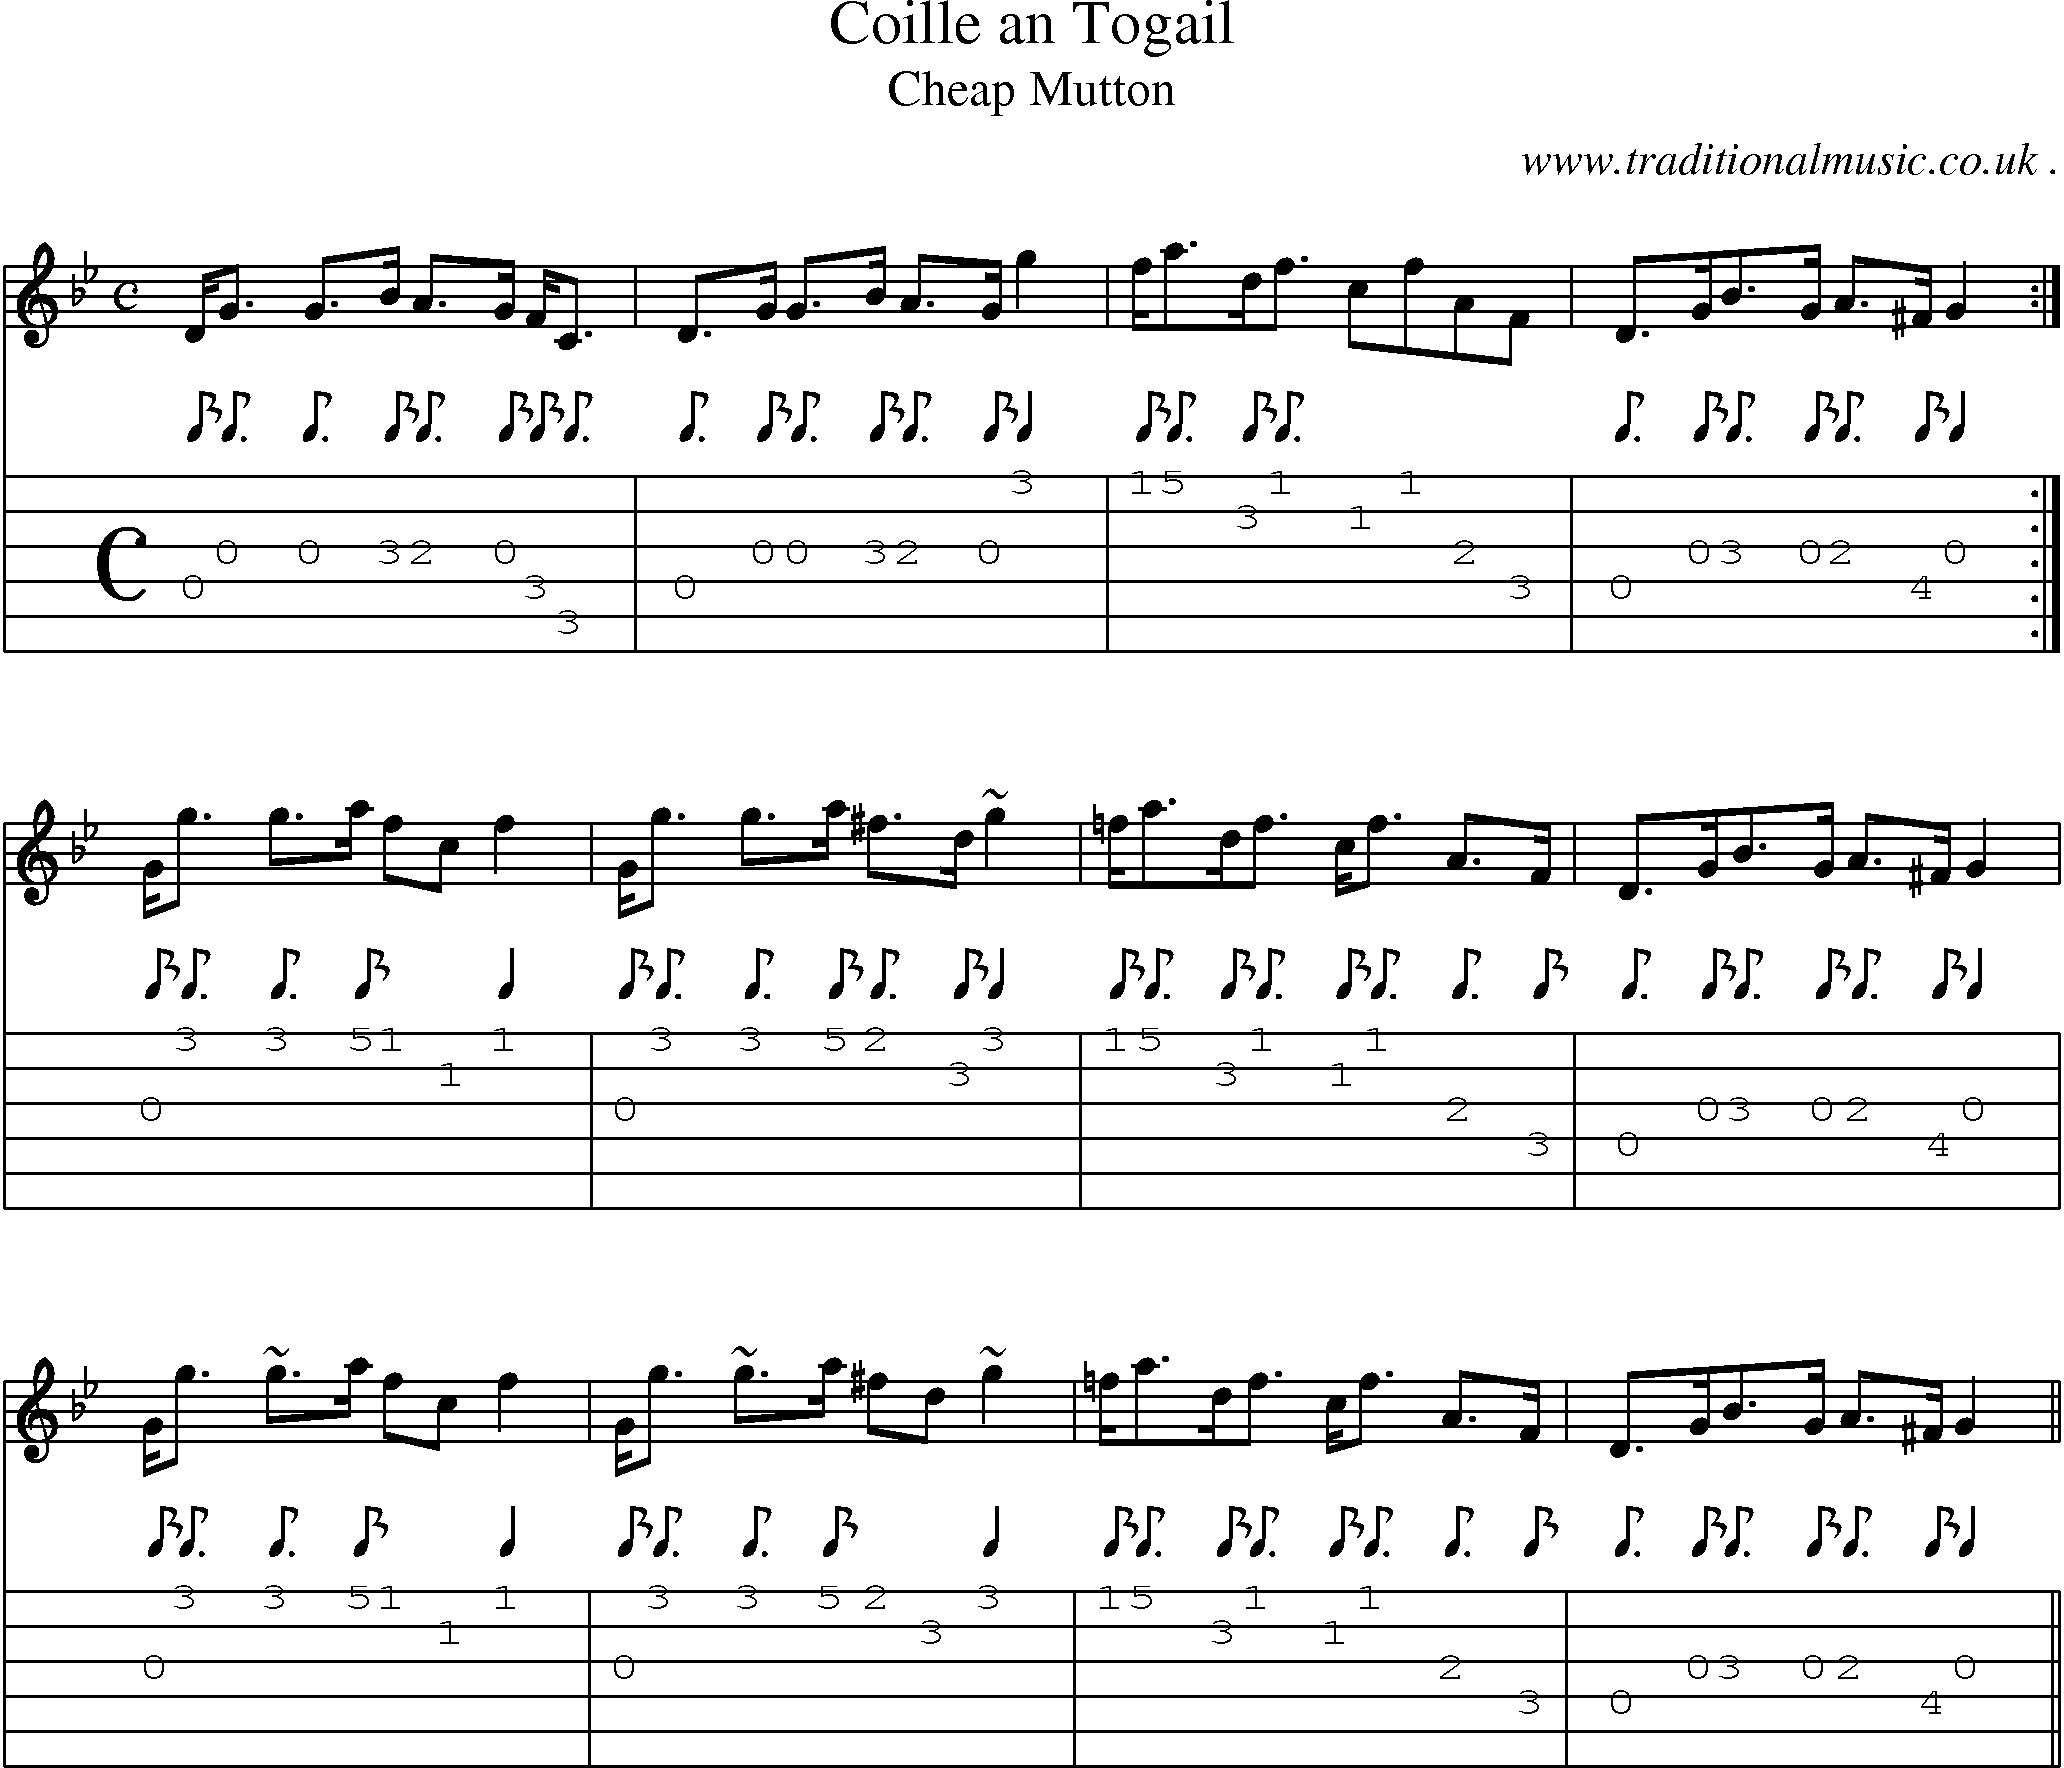 Sheet-music  score, Chords and Guitar Tabs for Coille An Togail